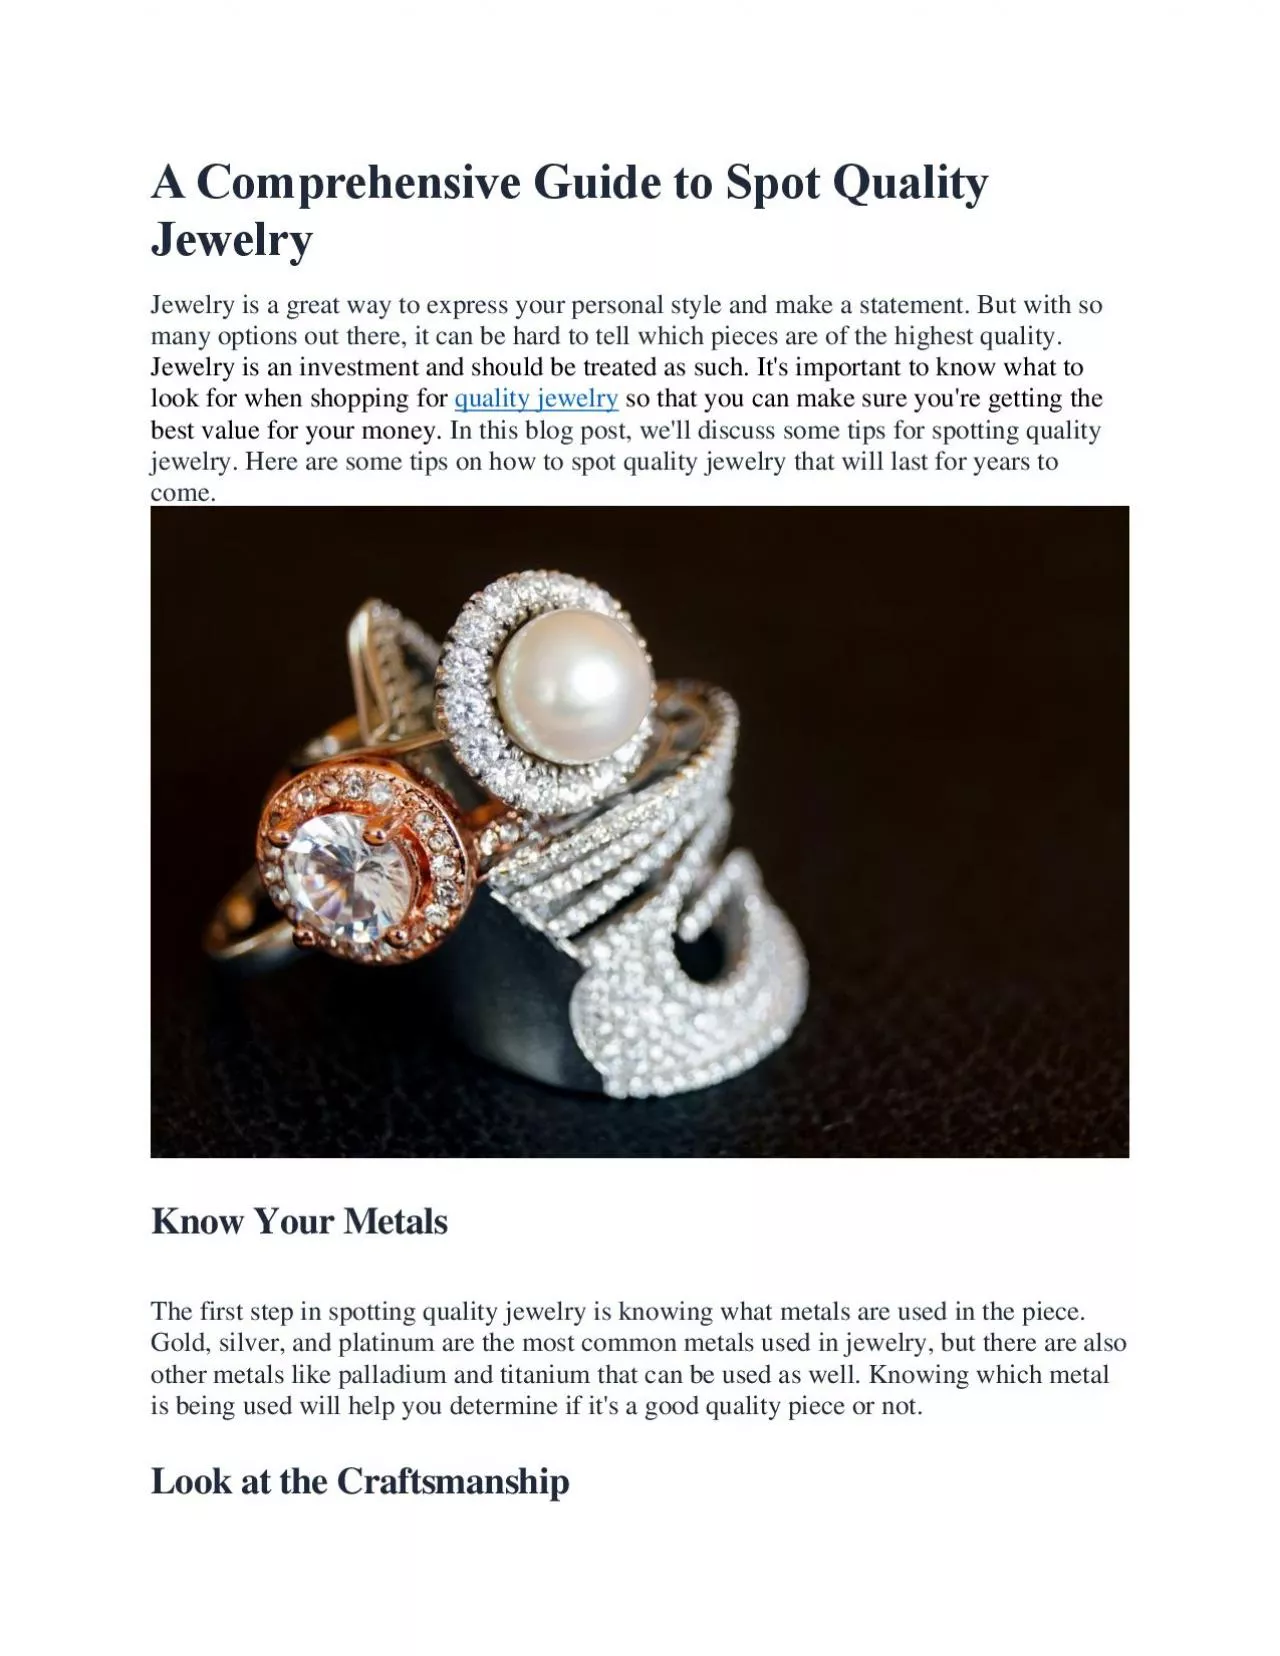 A Comprehensive Guide to Spot Quality Jewelry